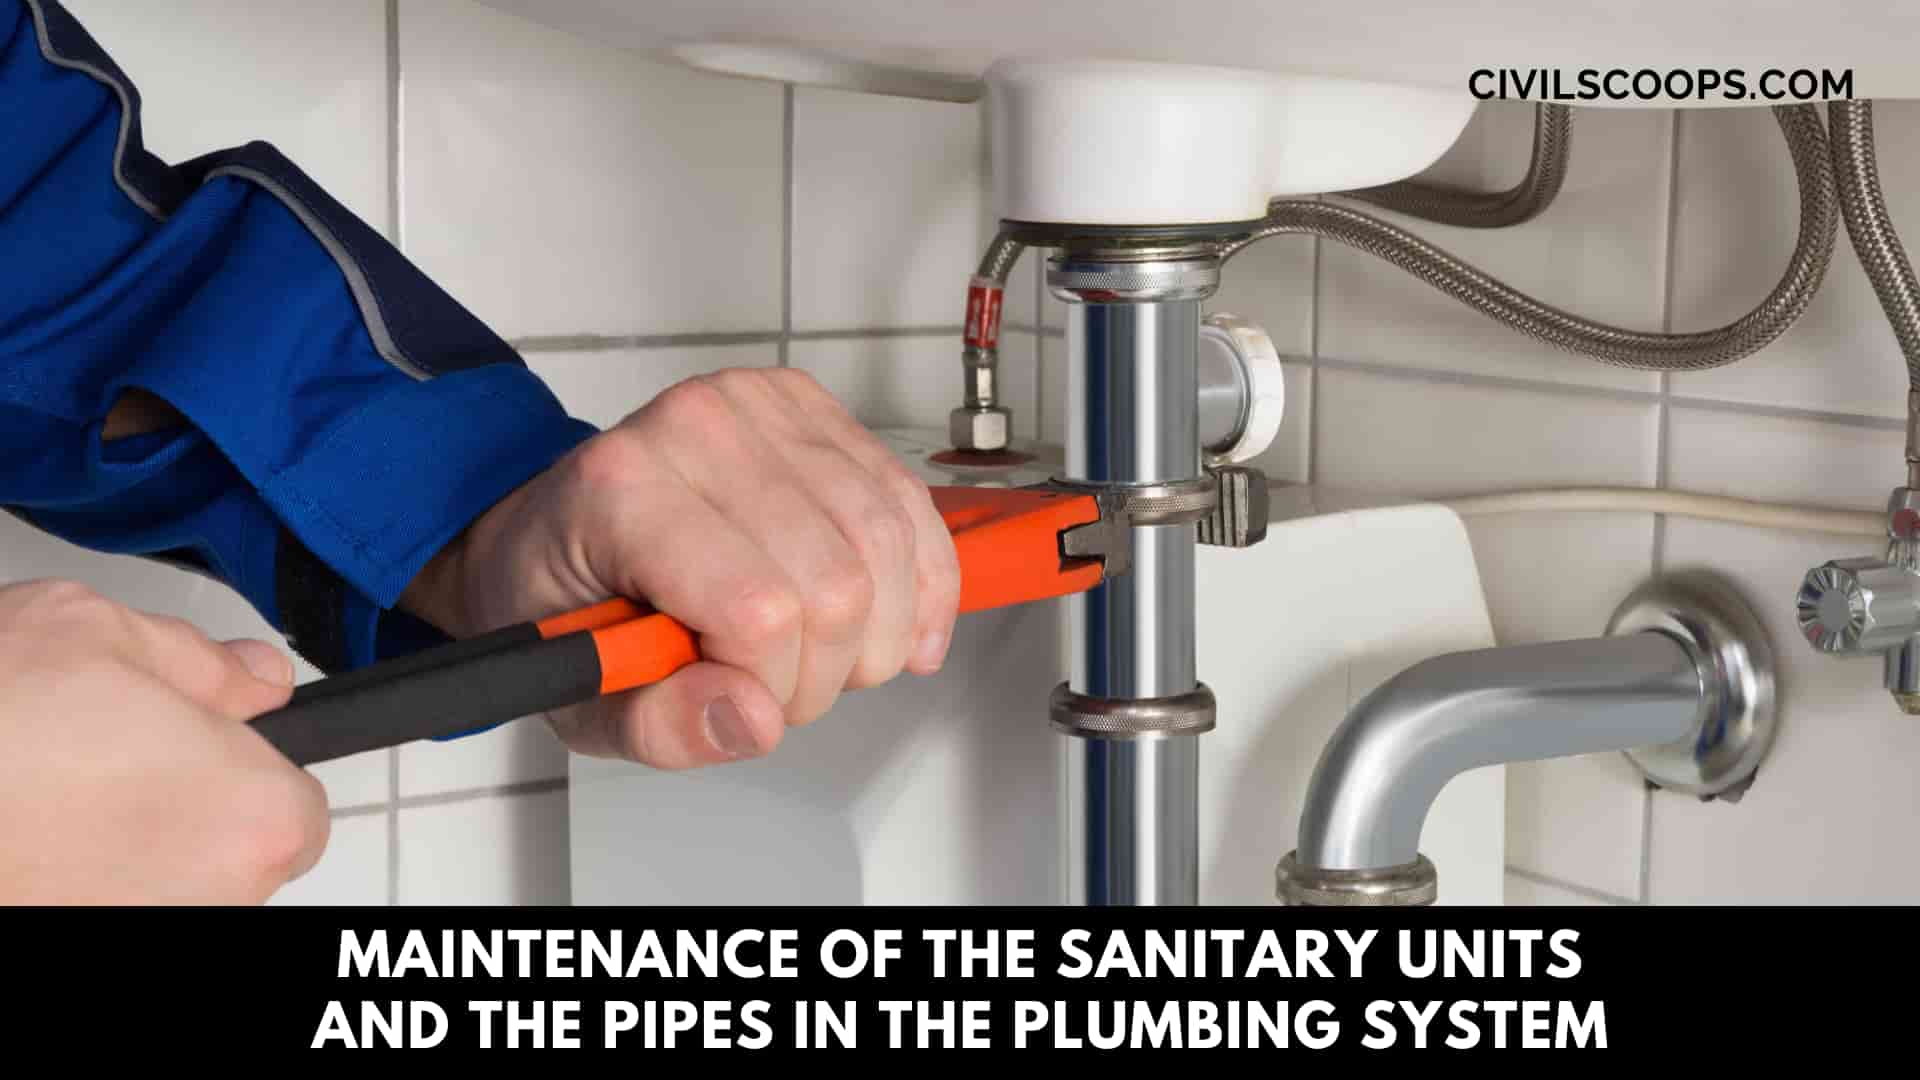 Maintenance of the Sanitary Units and the Pipes in the Plumbing System